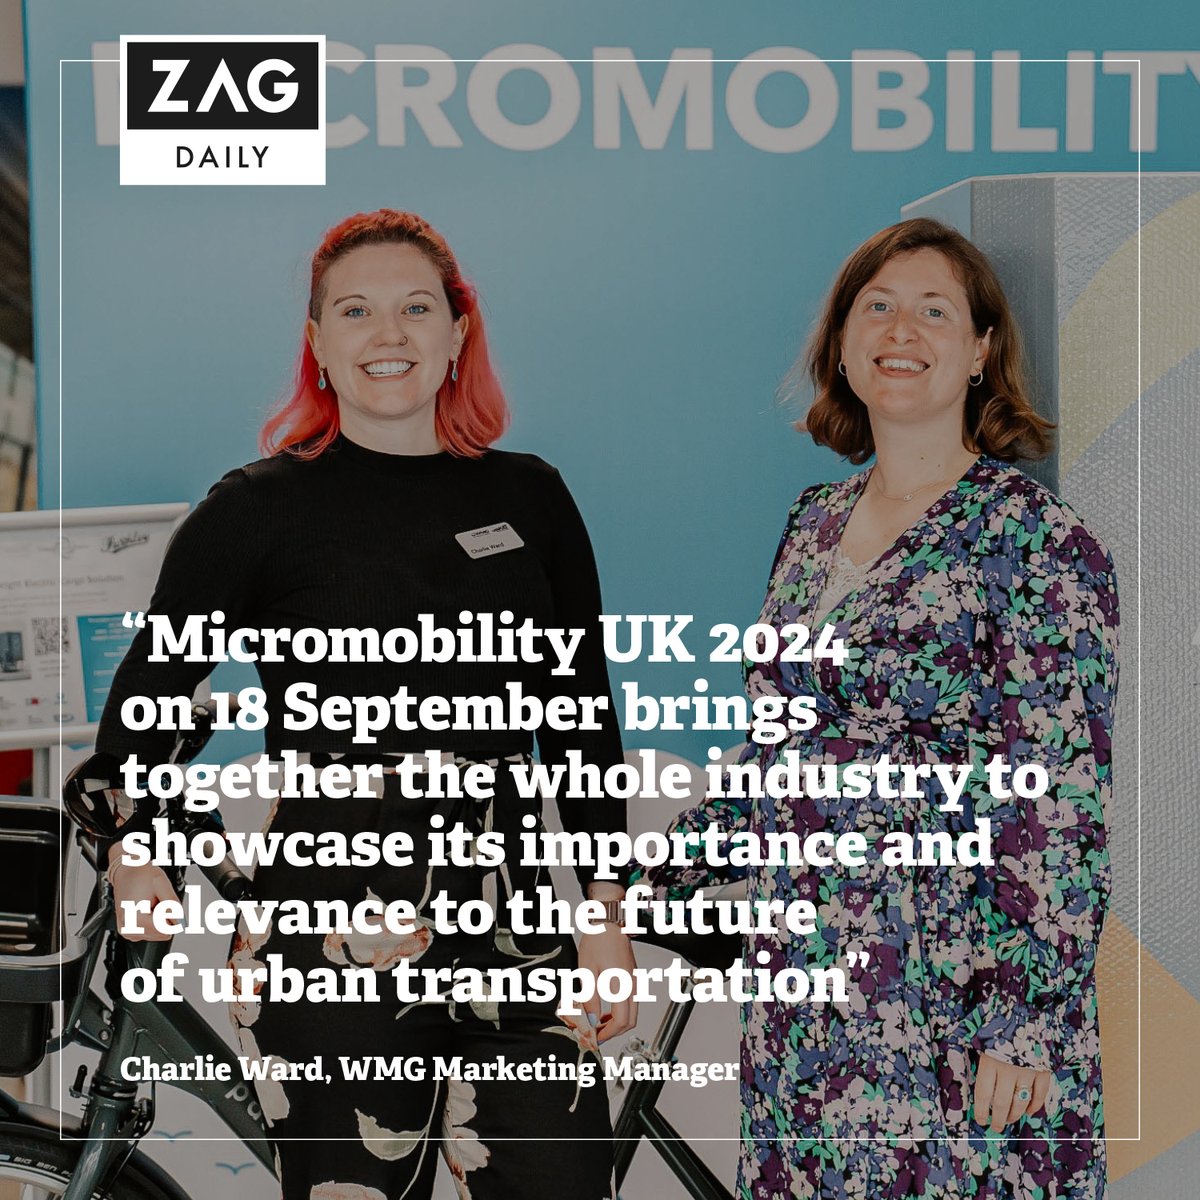 Today we're covering why bike share giant @nextbikebytier was sold to a British private equity firm, how @pbscsolutions is spearheading micromobility in the holy city of Medina and a save the date for Micromobility UK 2024. Newsletter sign up here👉zagdaily.com/zag-weekly/